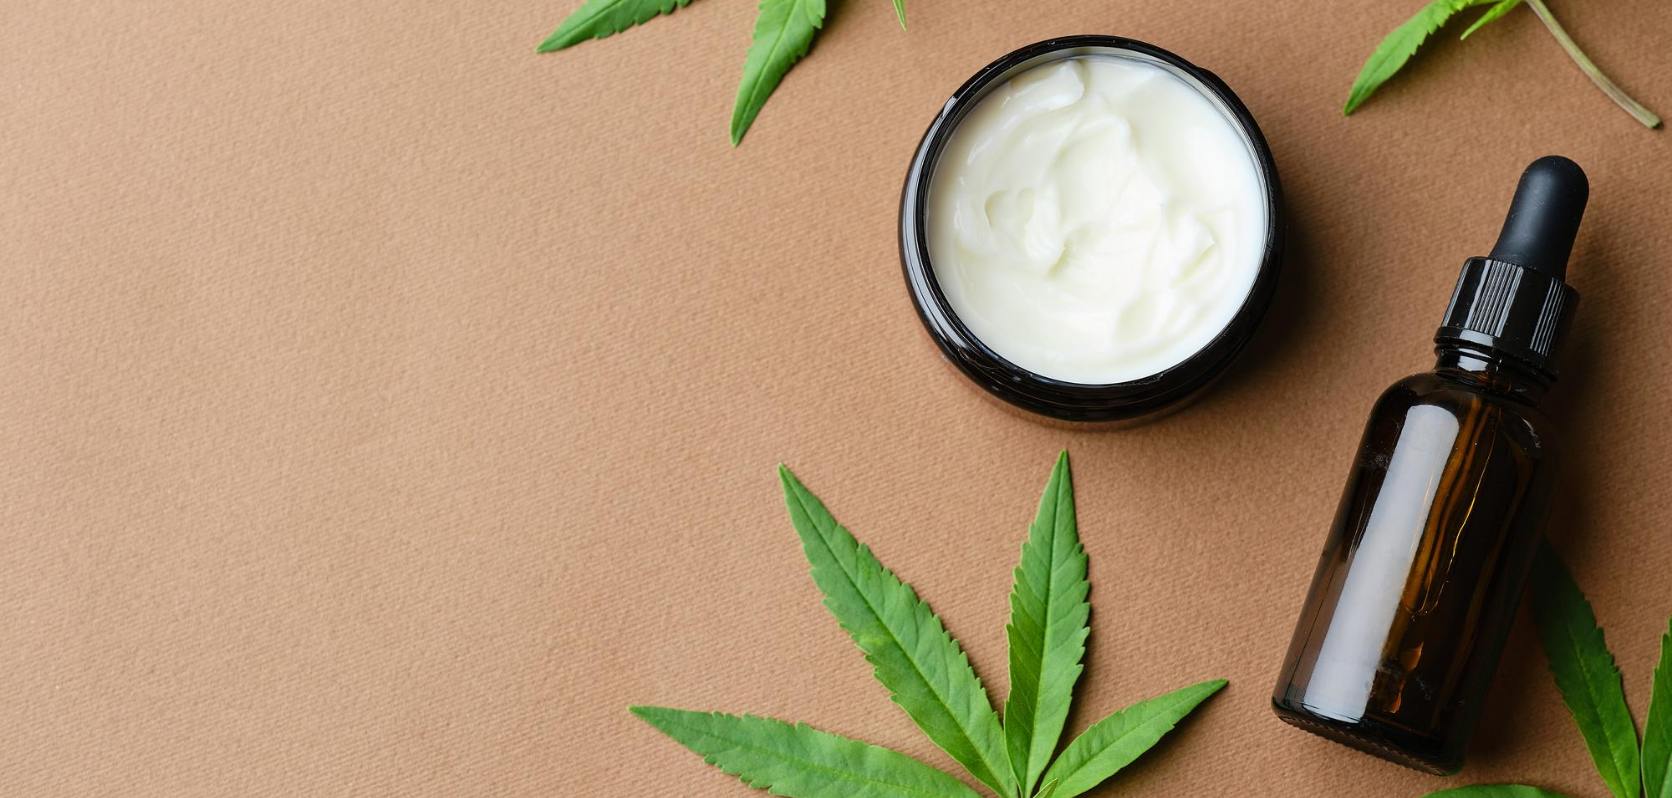 The biggest difference between CBD cream and THC topicals would be the fact that CBD cream contains no THC